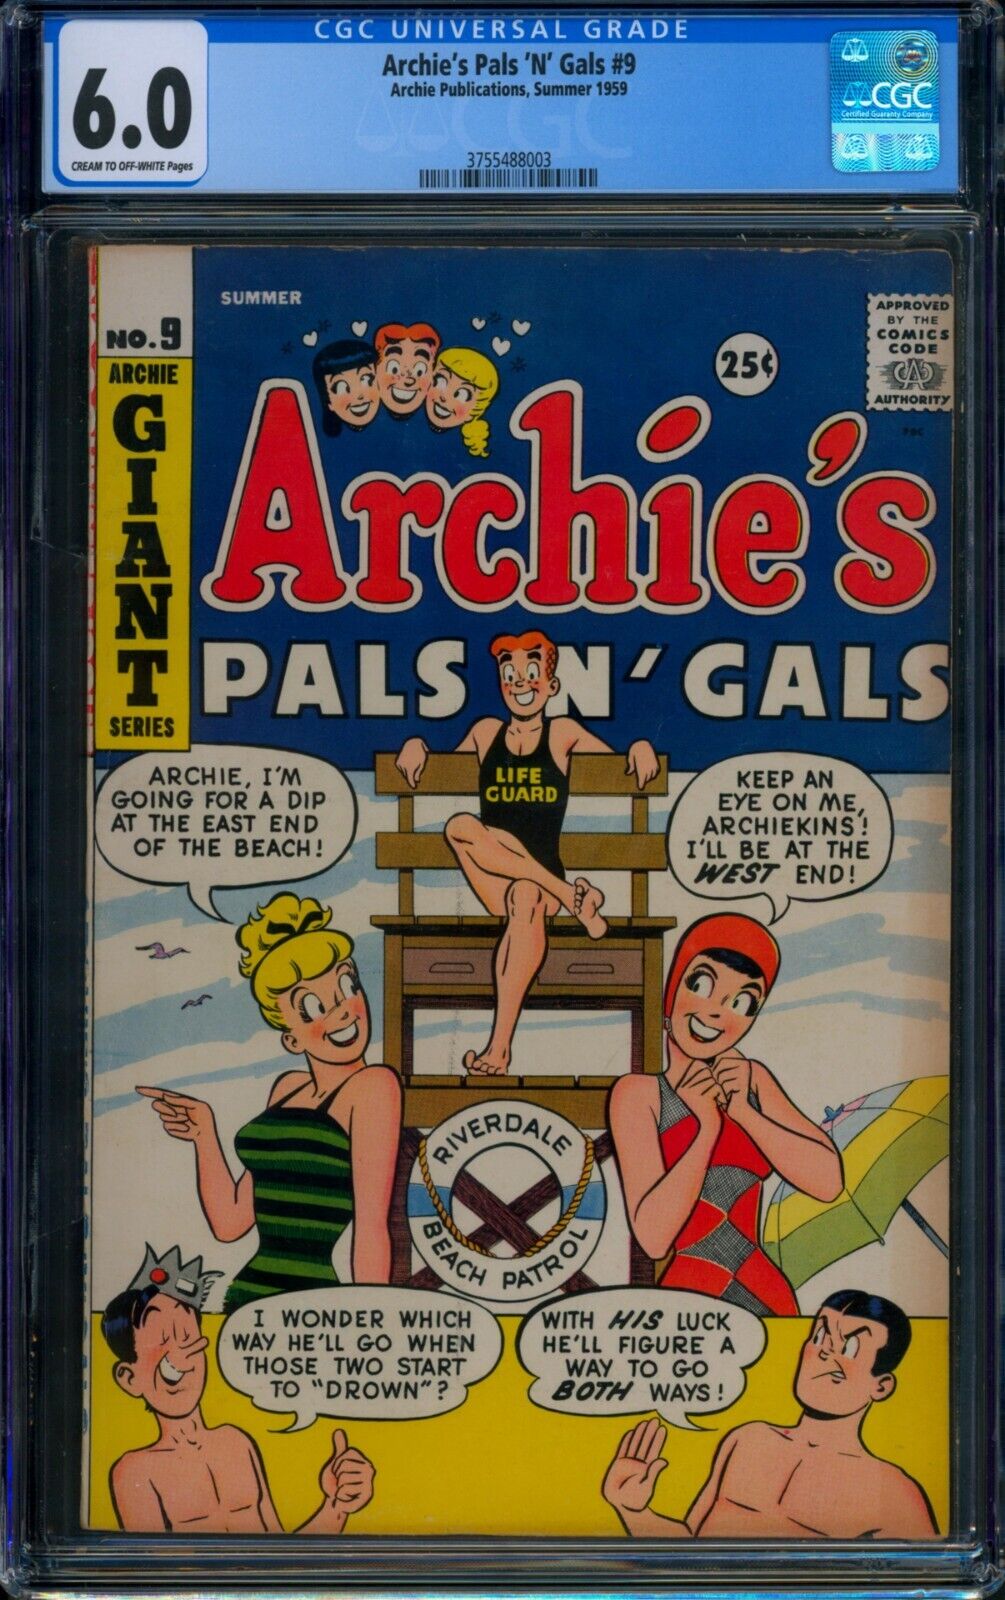 Archie's Pals 'n' Gals #9 ⭐ CGC 6.0 ⭐ Betty & Veronica Swimsuit Cover GGA 1959